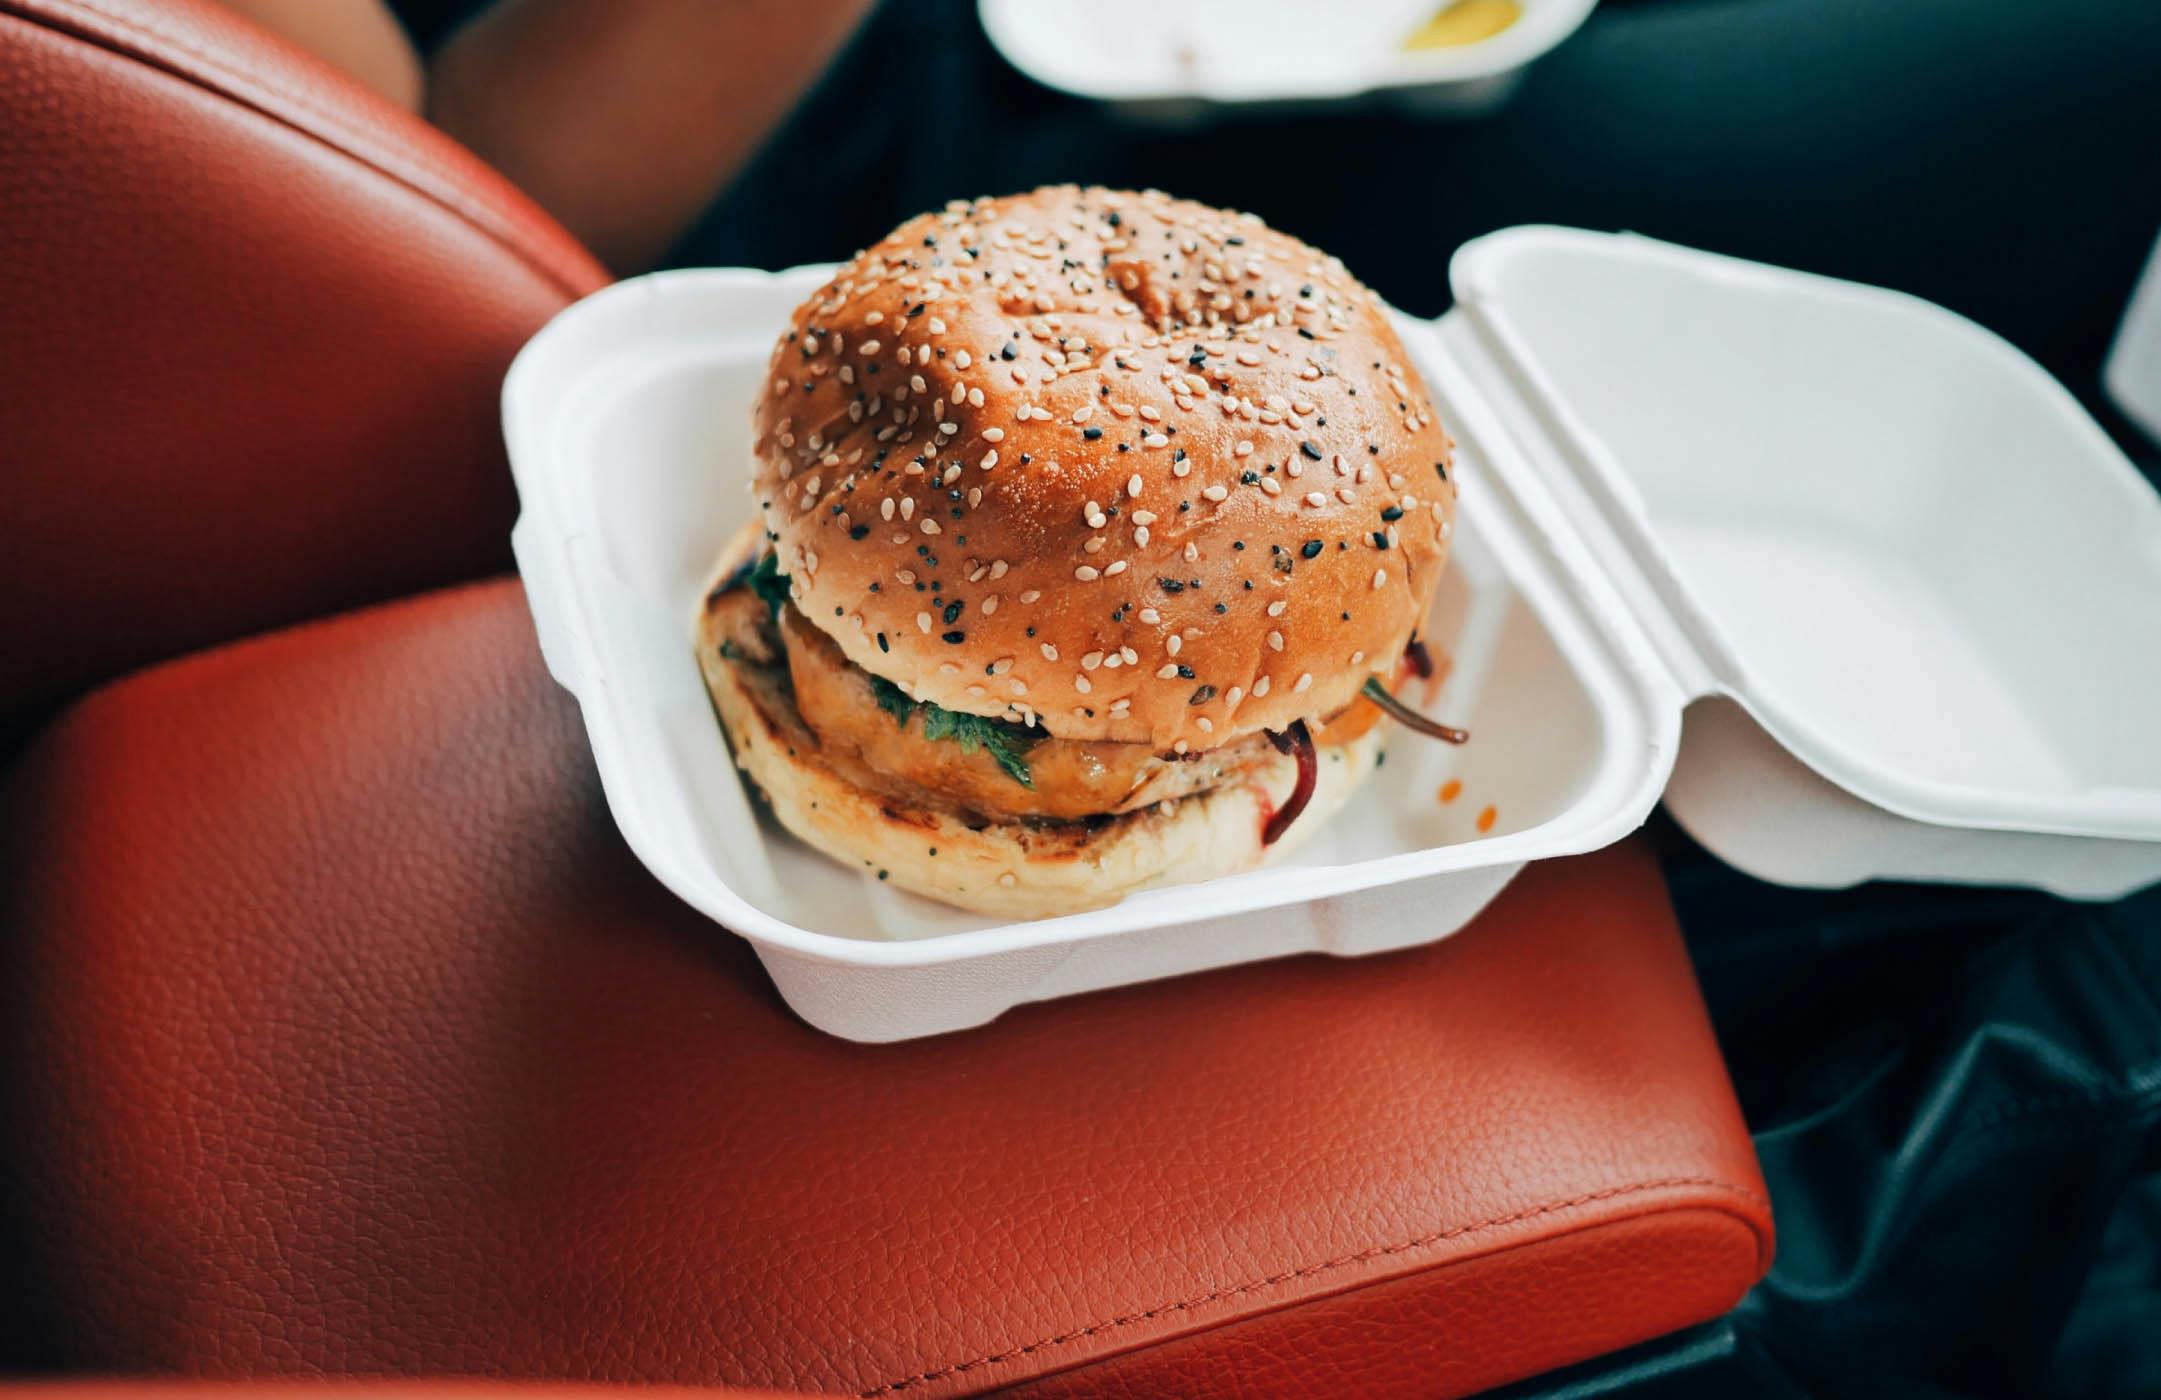 Photograph of hamburger in takeout container